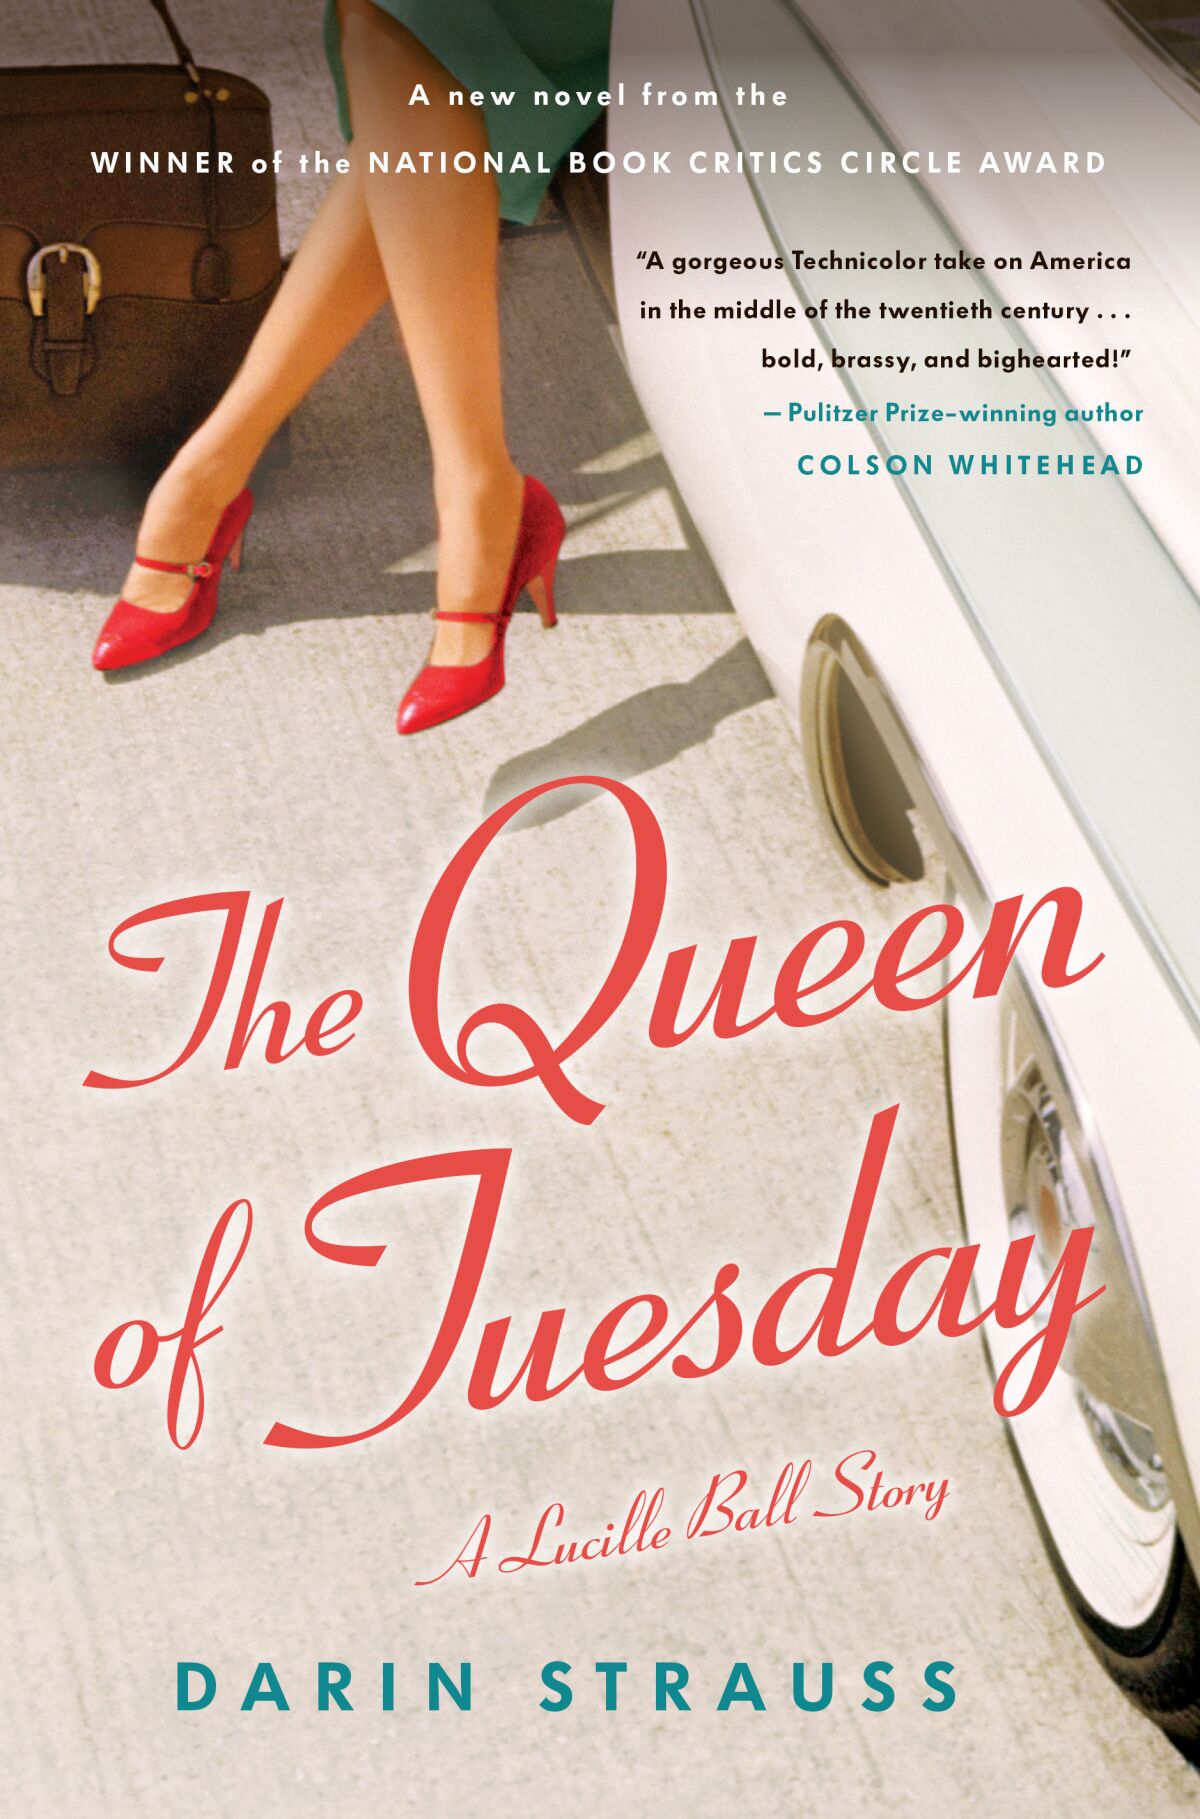 "The Queen of Tuesday," by Darin Strauss.